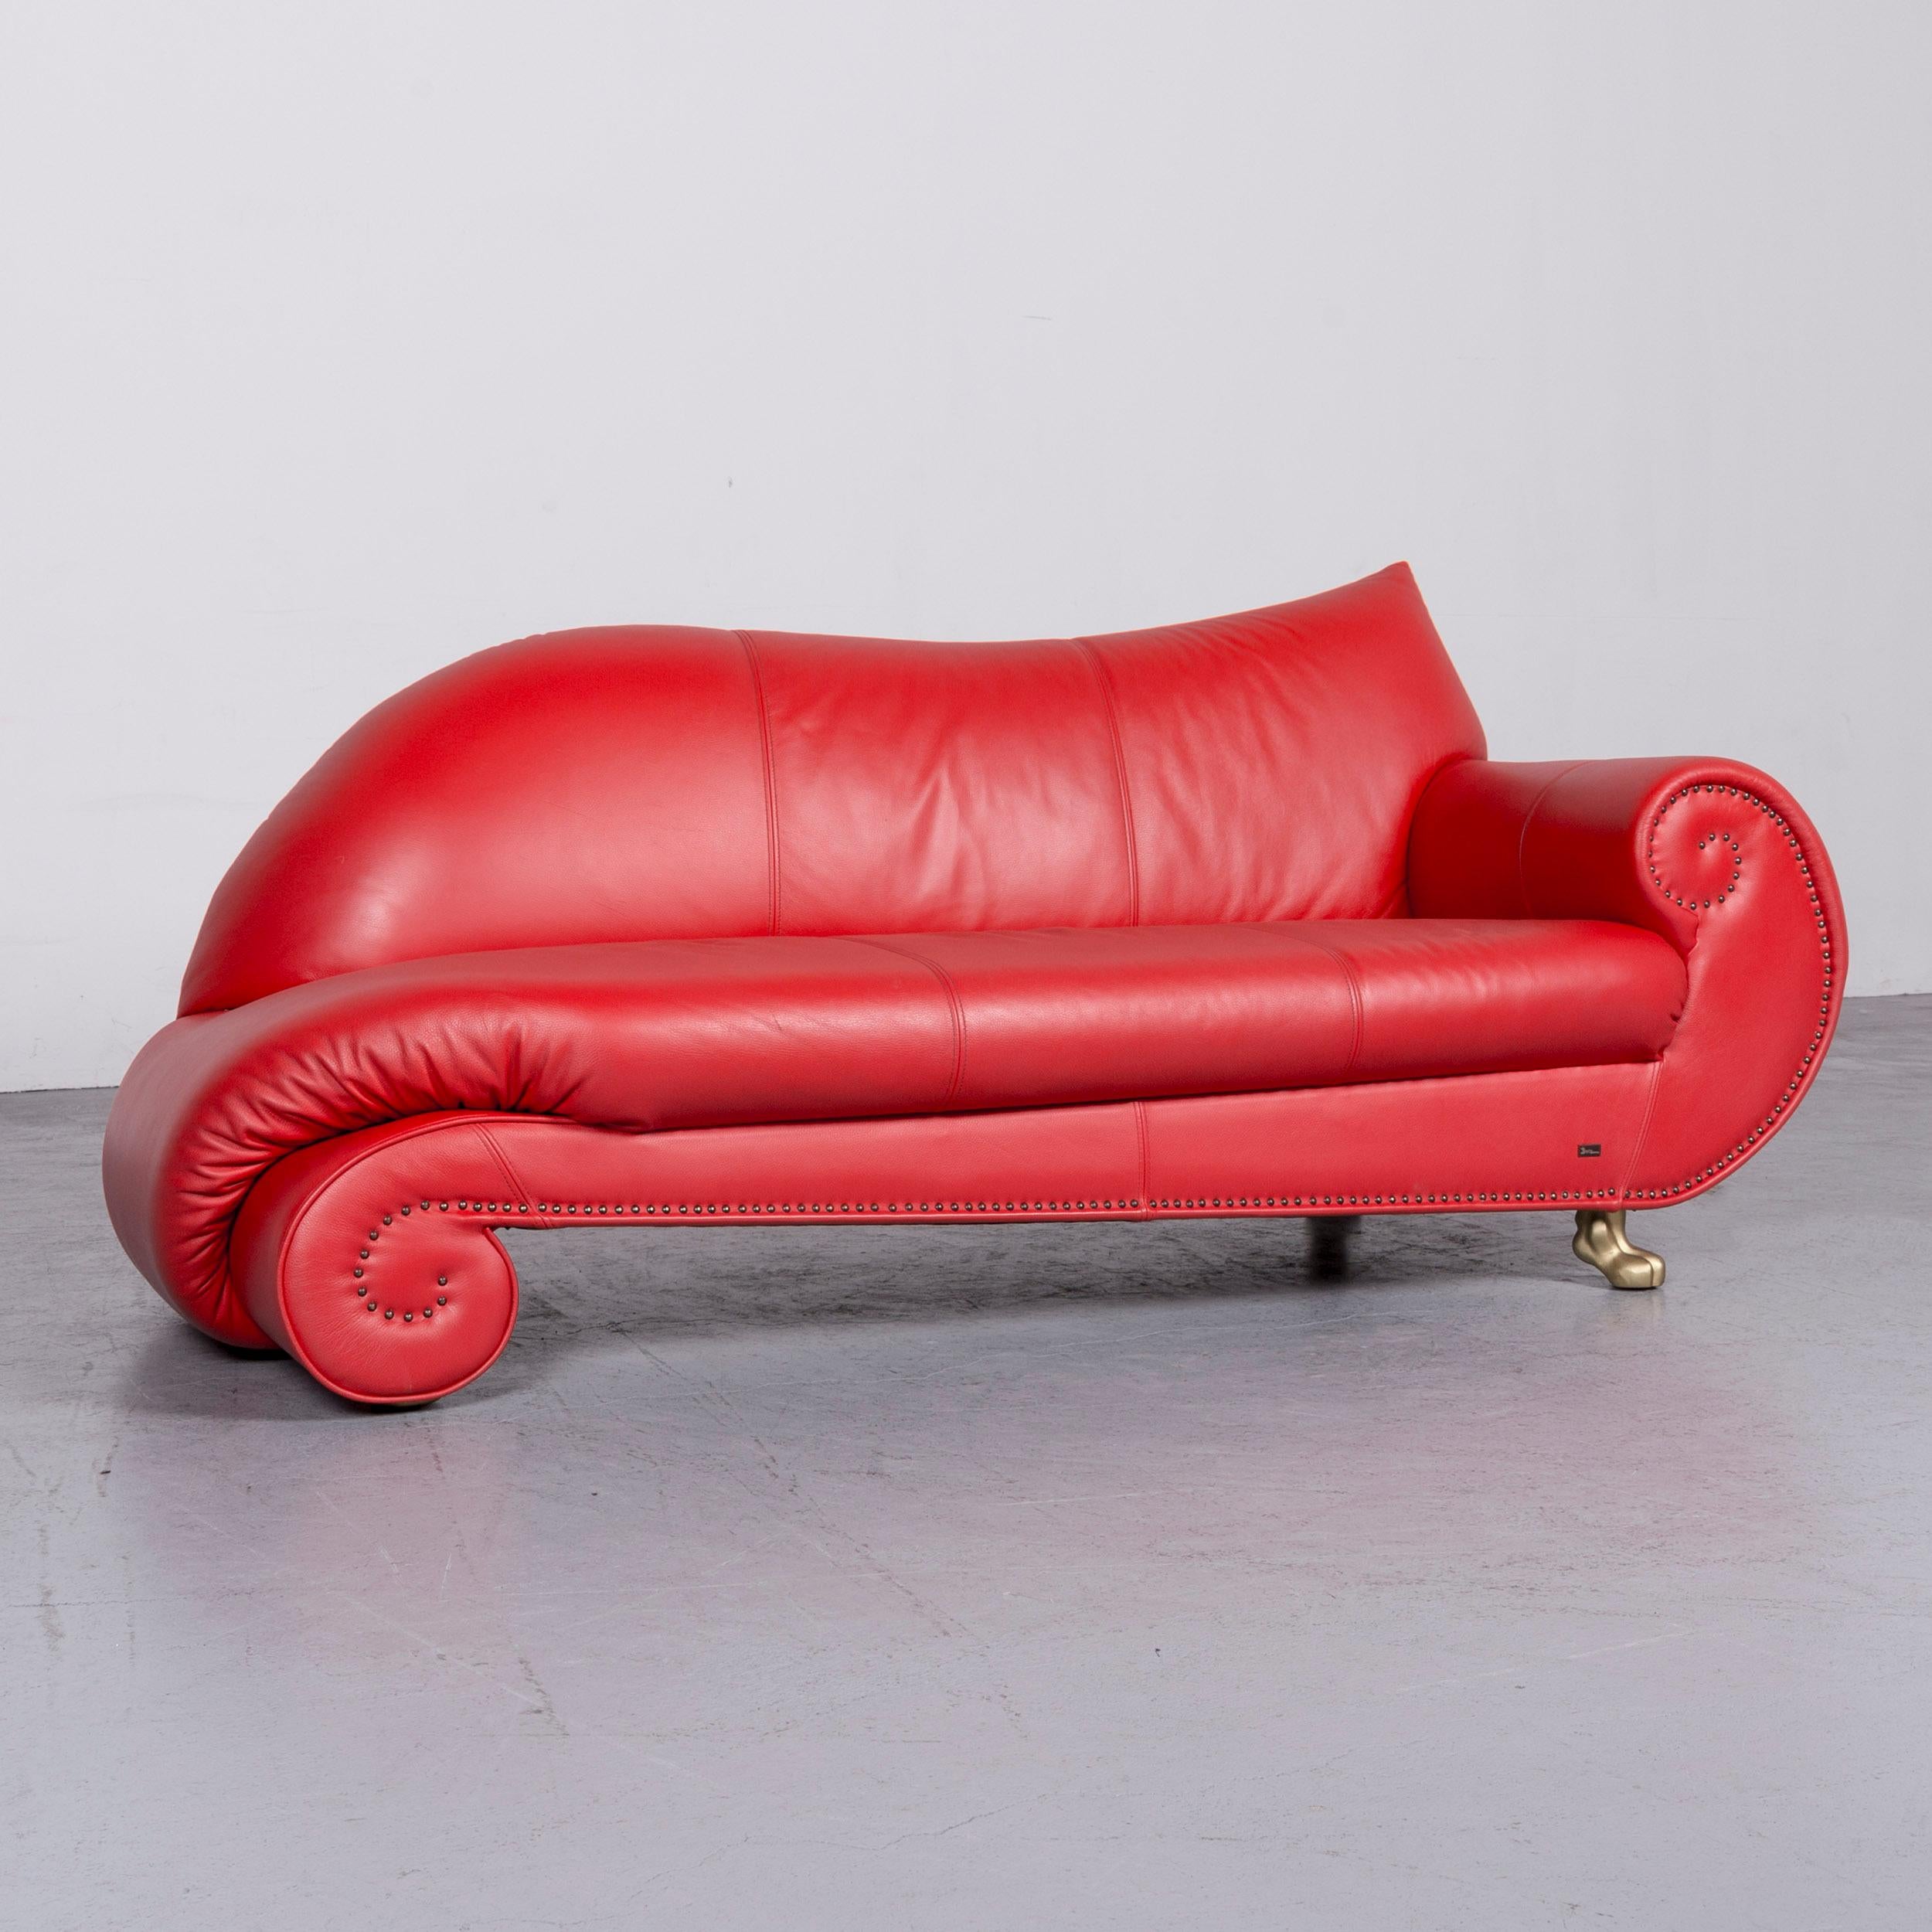 We bring to you a Bretz Gaudi designer leather sofa red three-seat couch.

















































































 